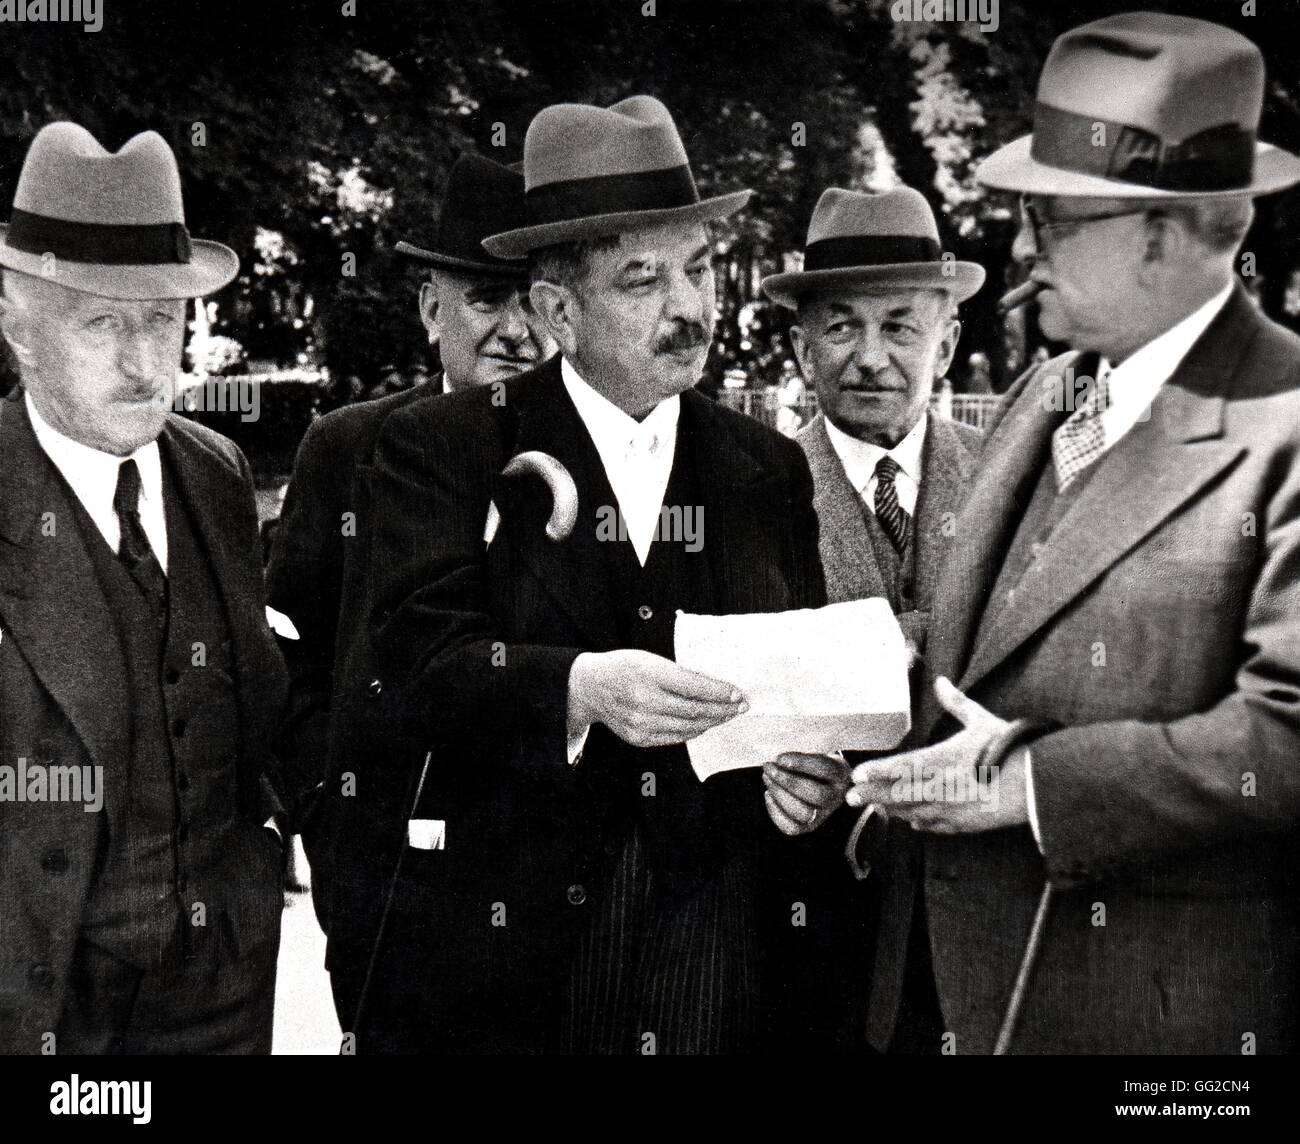 Vichy government: the new group with, from left to right, Mr. Milan, Francetti, Laval and Borel July 1940 France, Second World War war Stock Photo